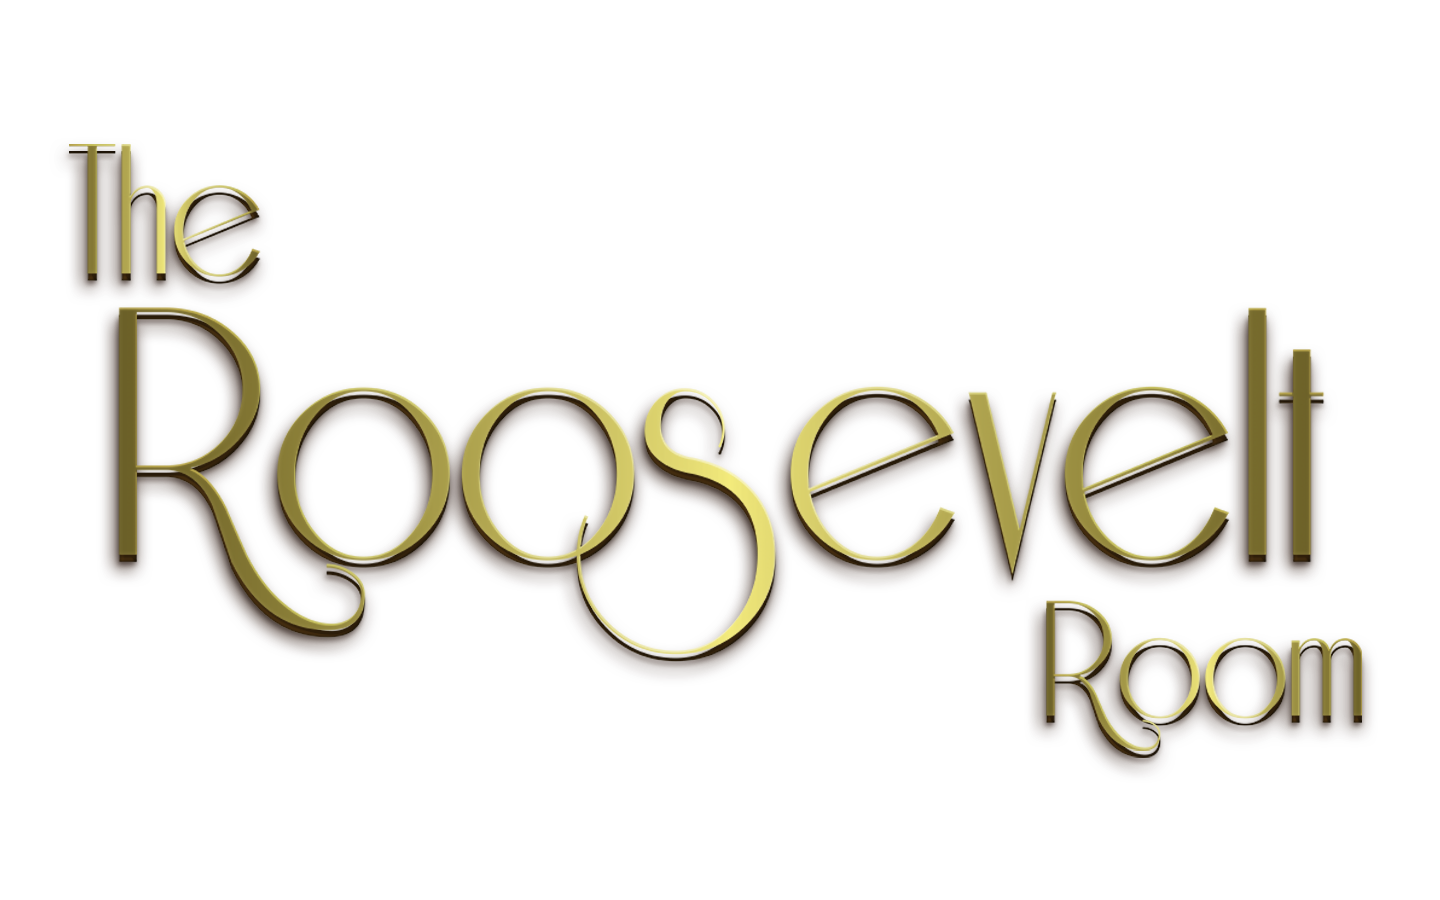 The Roosevelt Room